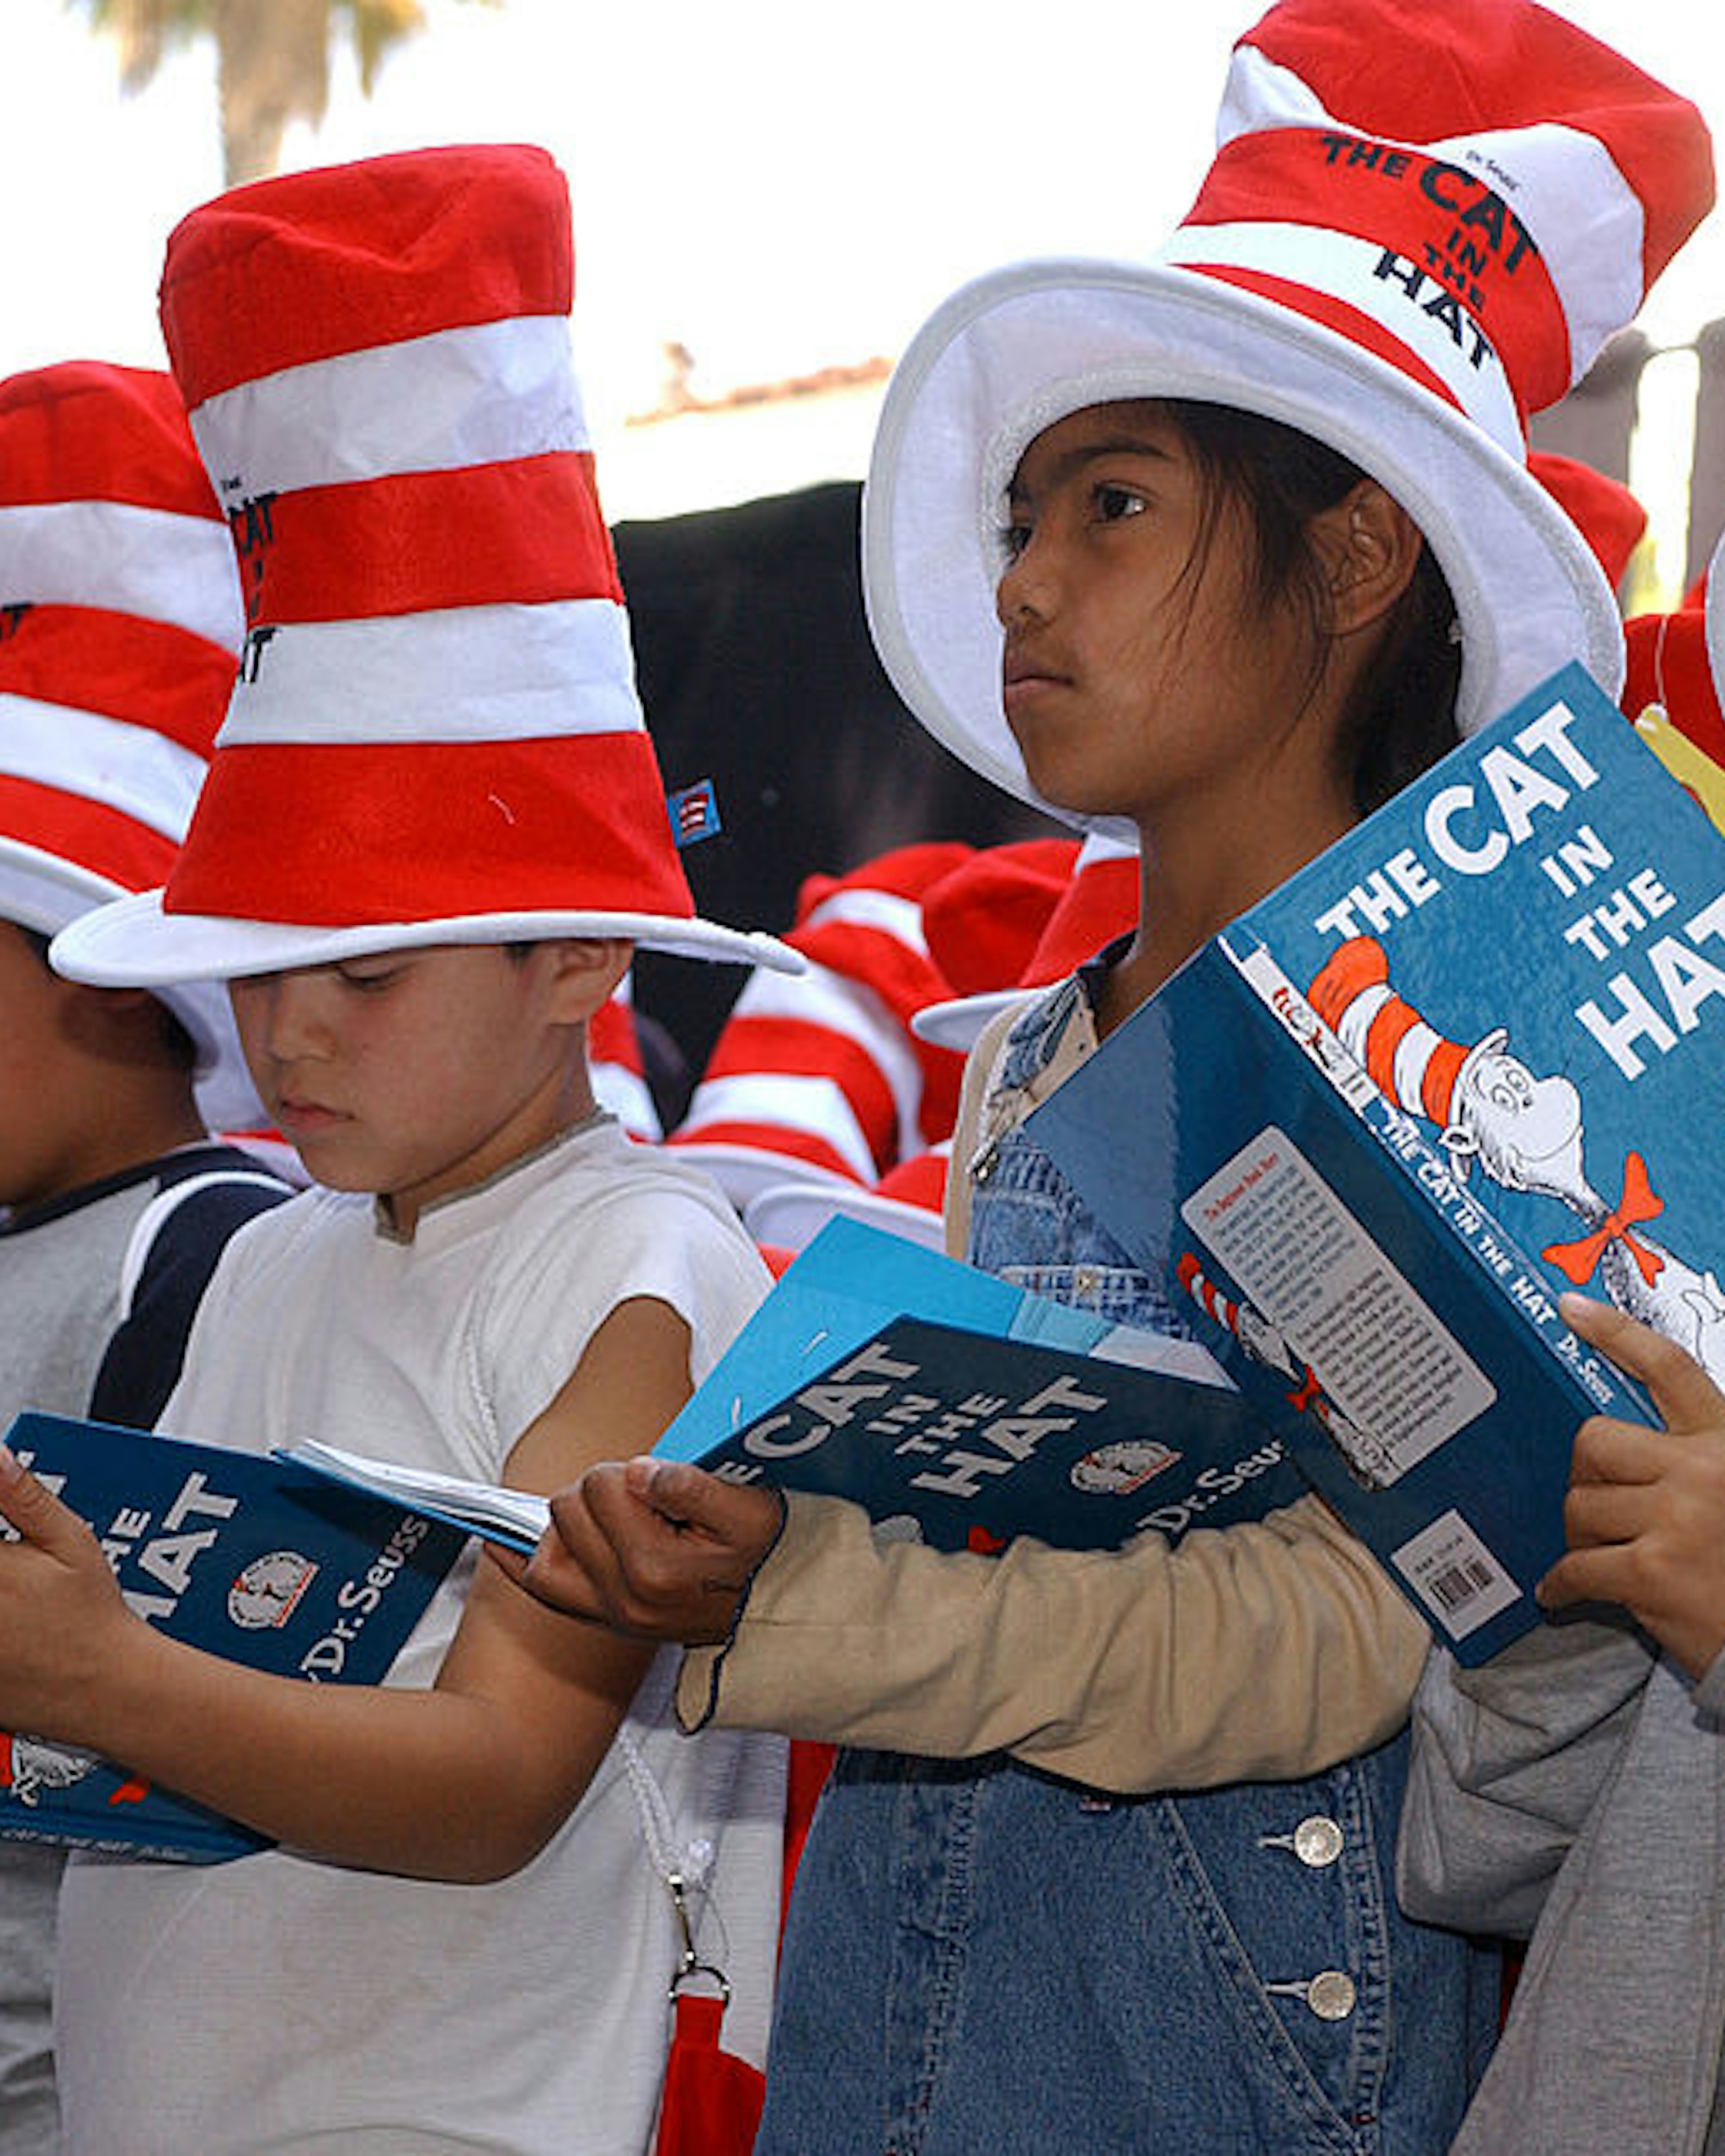 HOLLYWOOD - MARCH 11: Children read from "The Cat in the Hat" book at a ceremony honoring the late children's book author Dr. Seuss (Theodore Geisel) with a star on the Hollywood Walk of Fame on March 11, 2004 in Hollywood , California. (Photo by Vince Bucci/Getty Images)